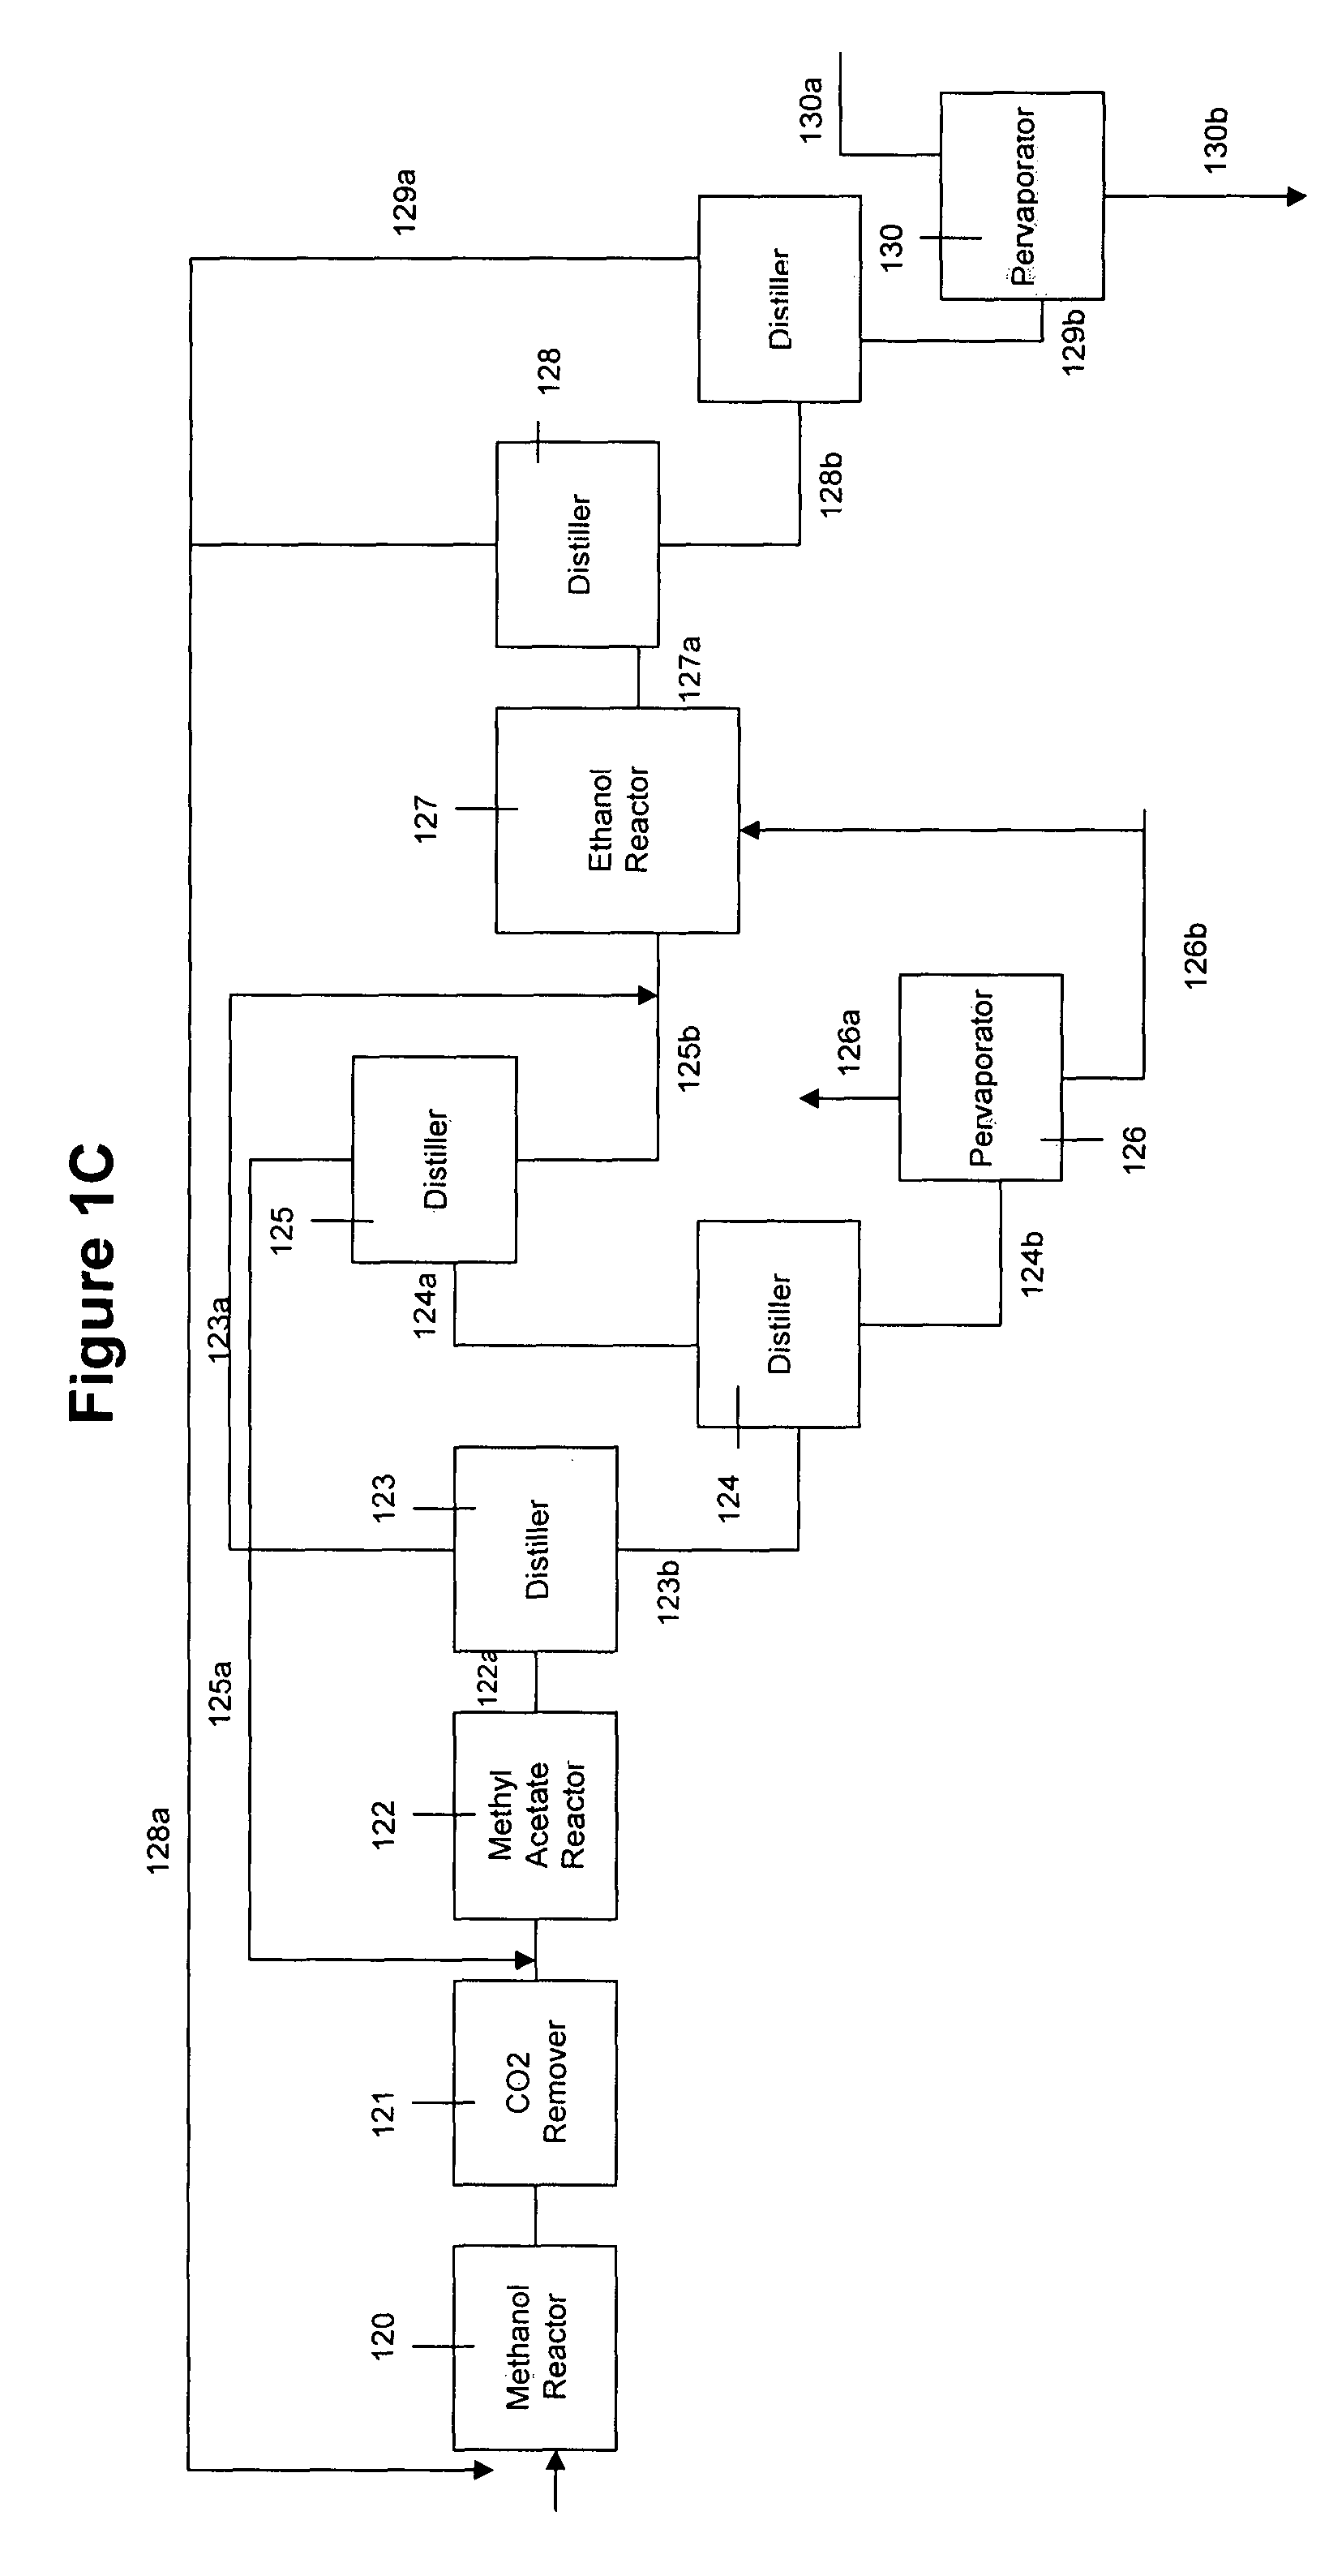 System and method for converting biomass to ethanol via syngas